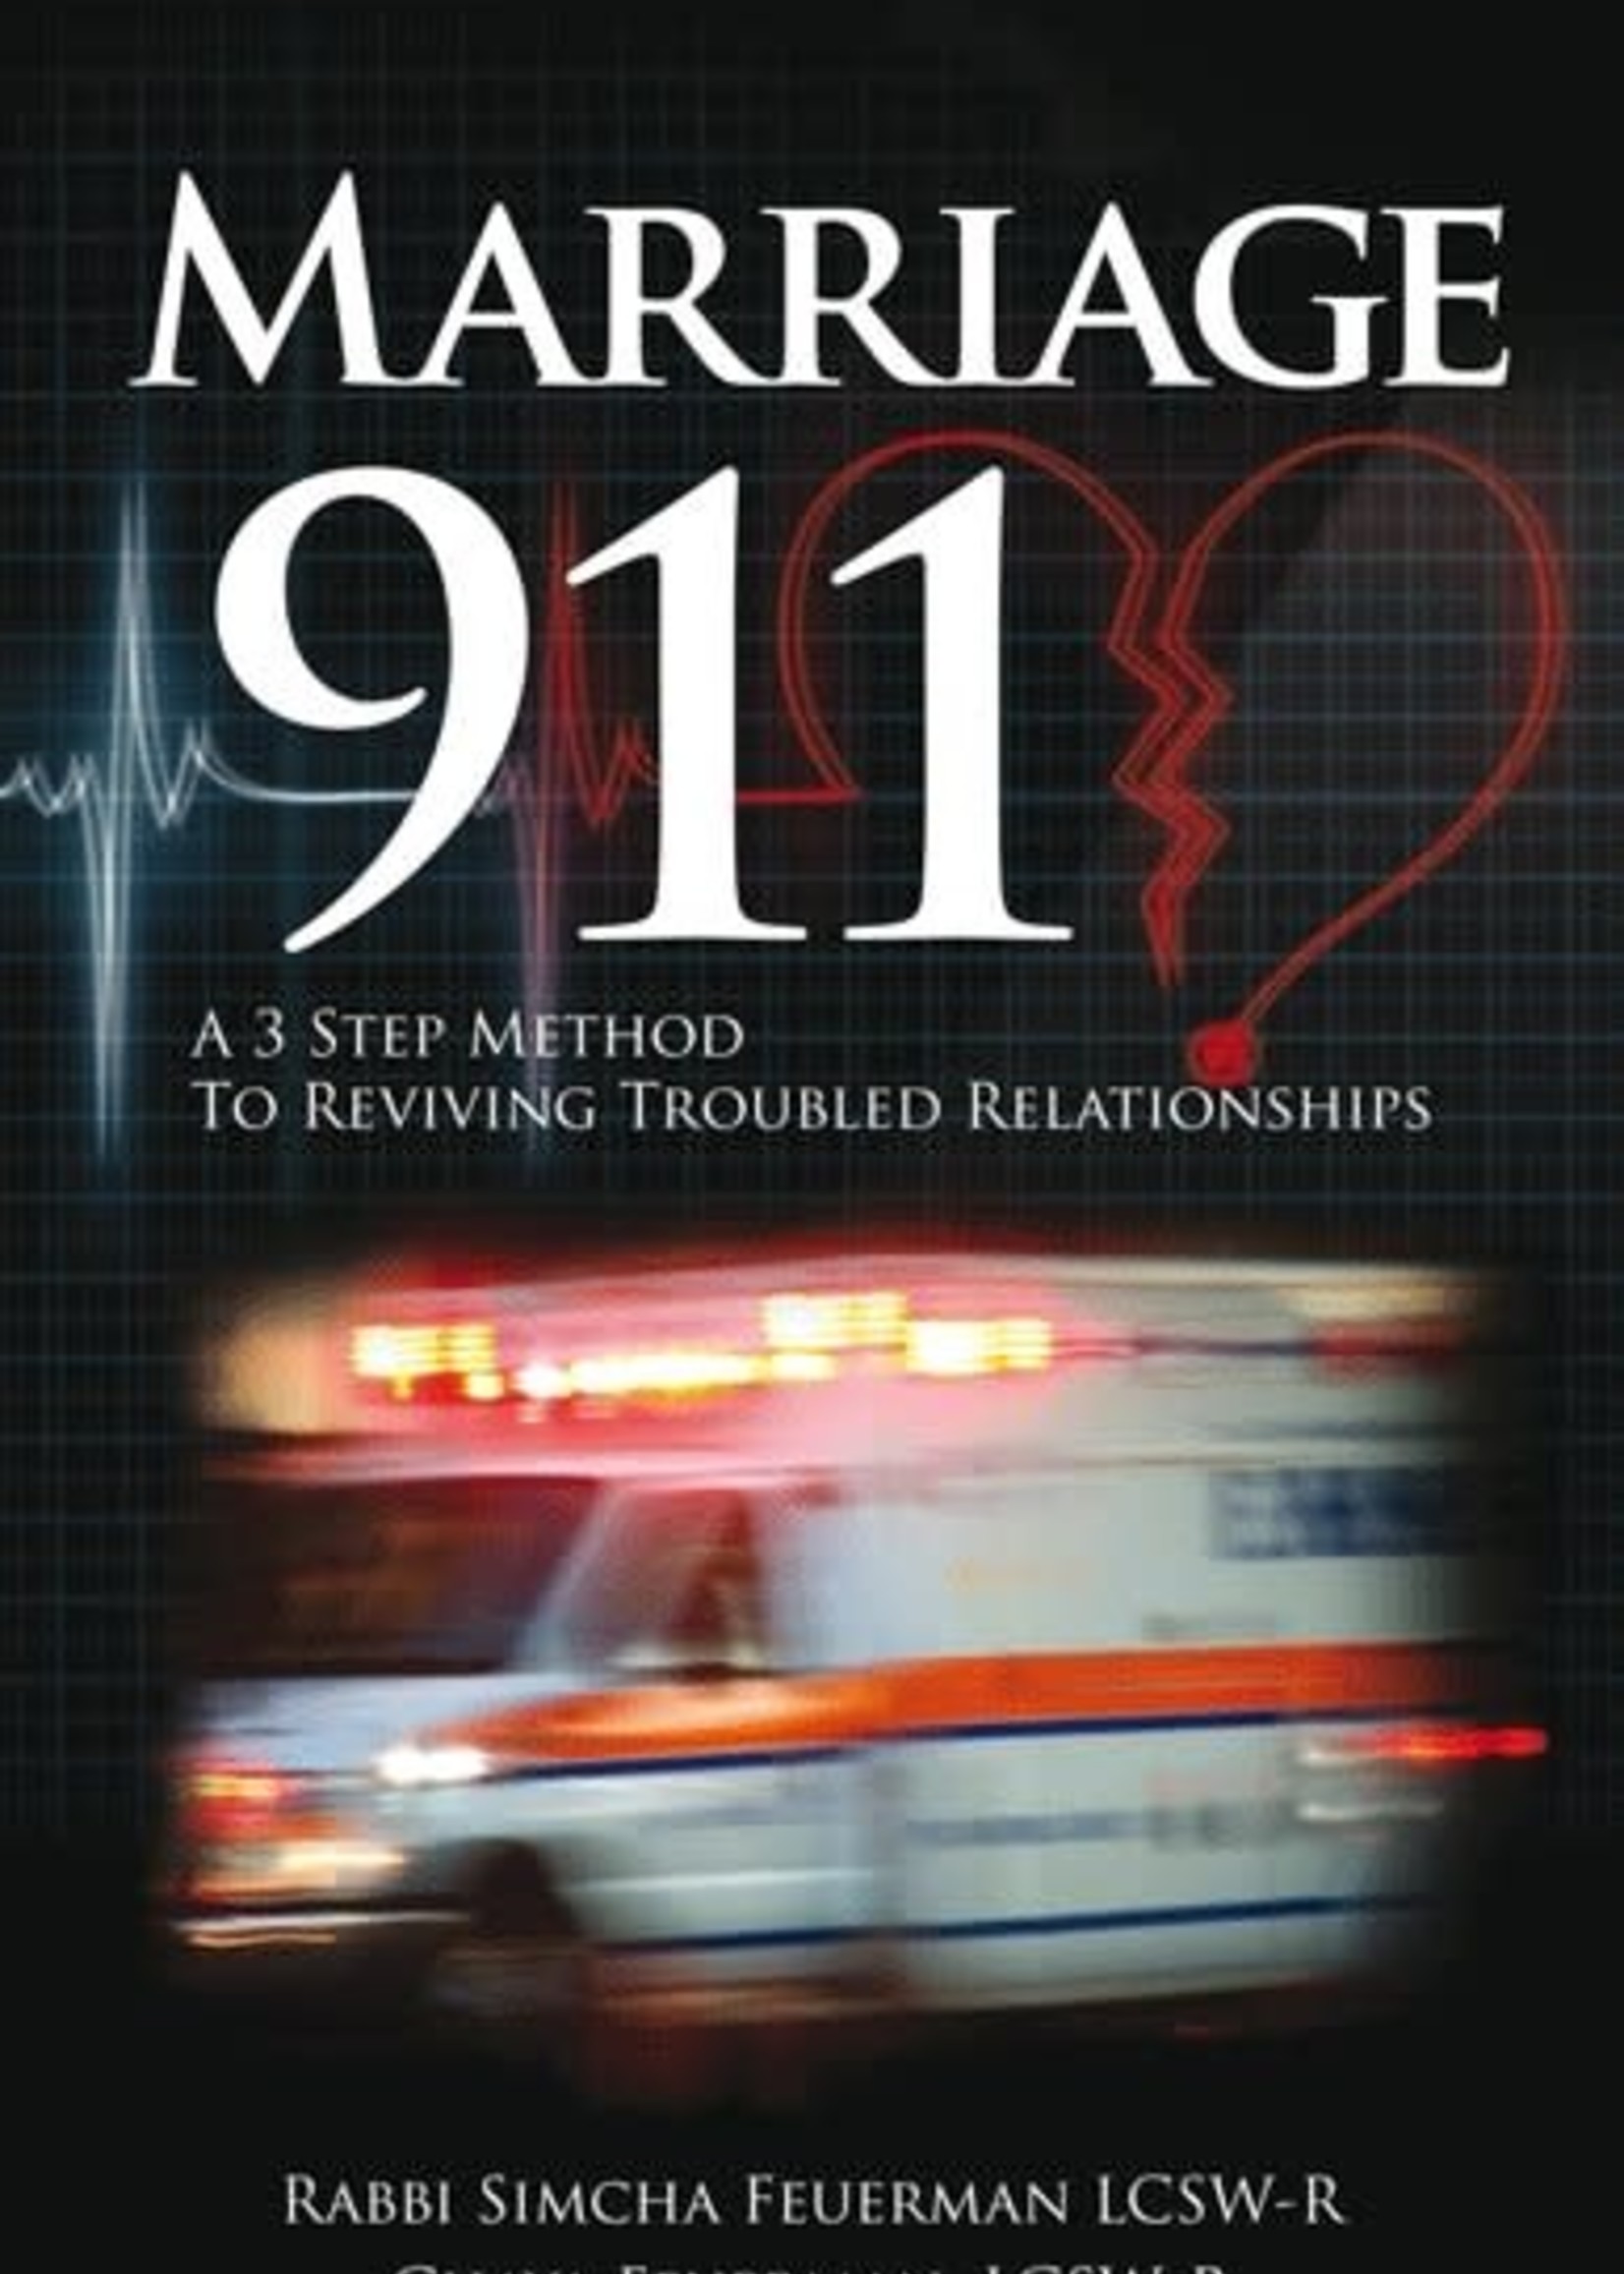 Rabbi Simcha Feuerman / Chaya Feuerman Marriage 911 - A 3 Step Method to Reviving Troubled Relationships